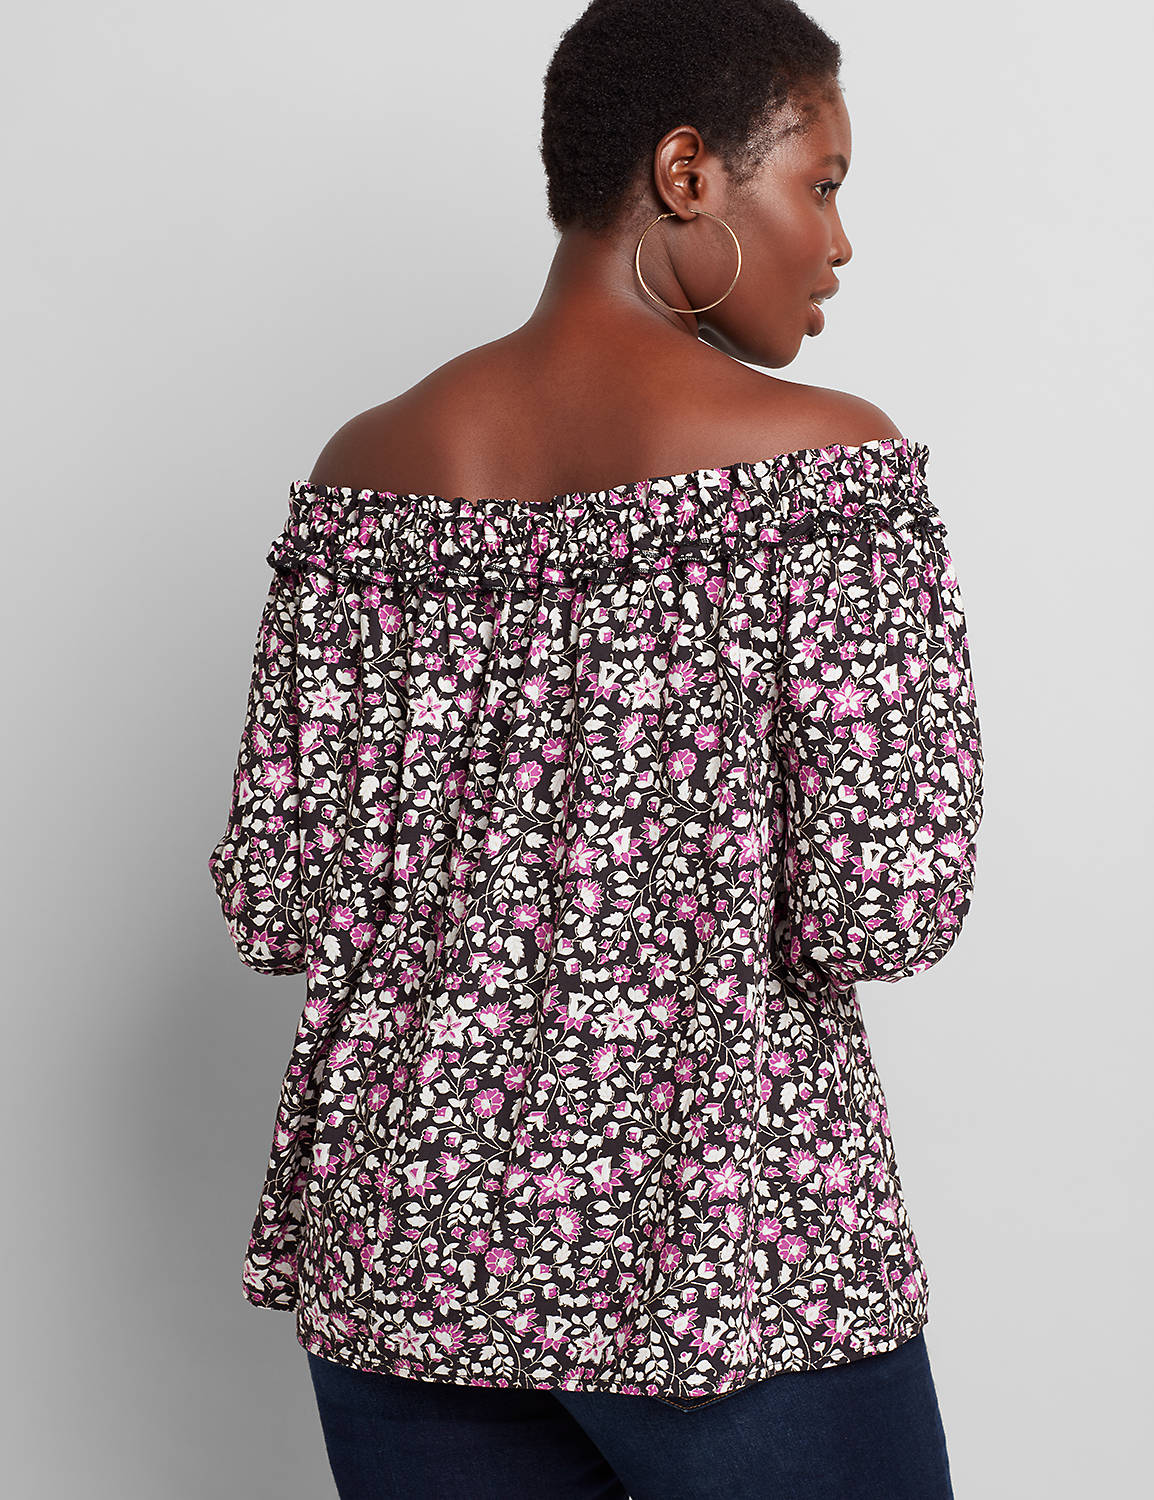 1112594 Off The Shoulder Printed Top:LBSU20344_VineyLinearFloral_colorway2:14/16 Product Image 2